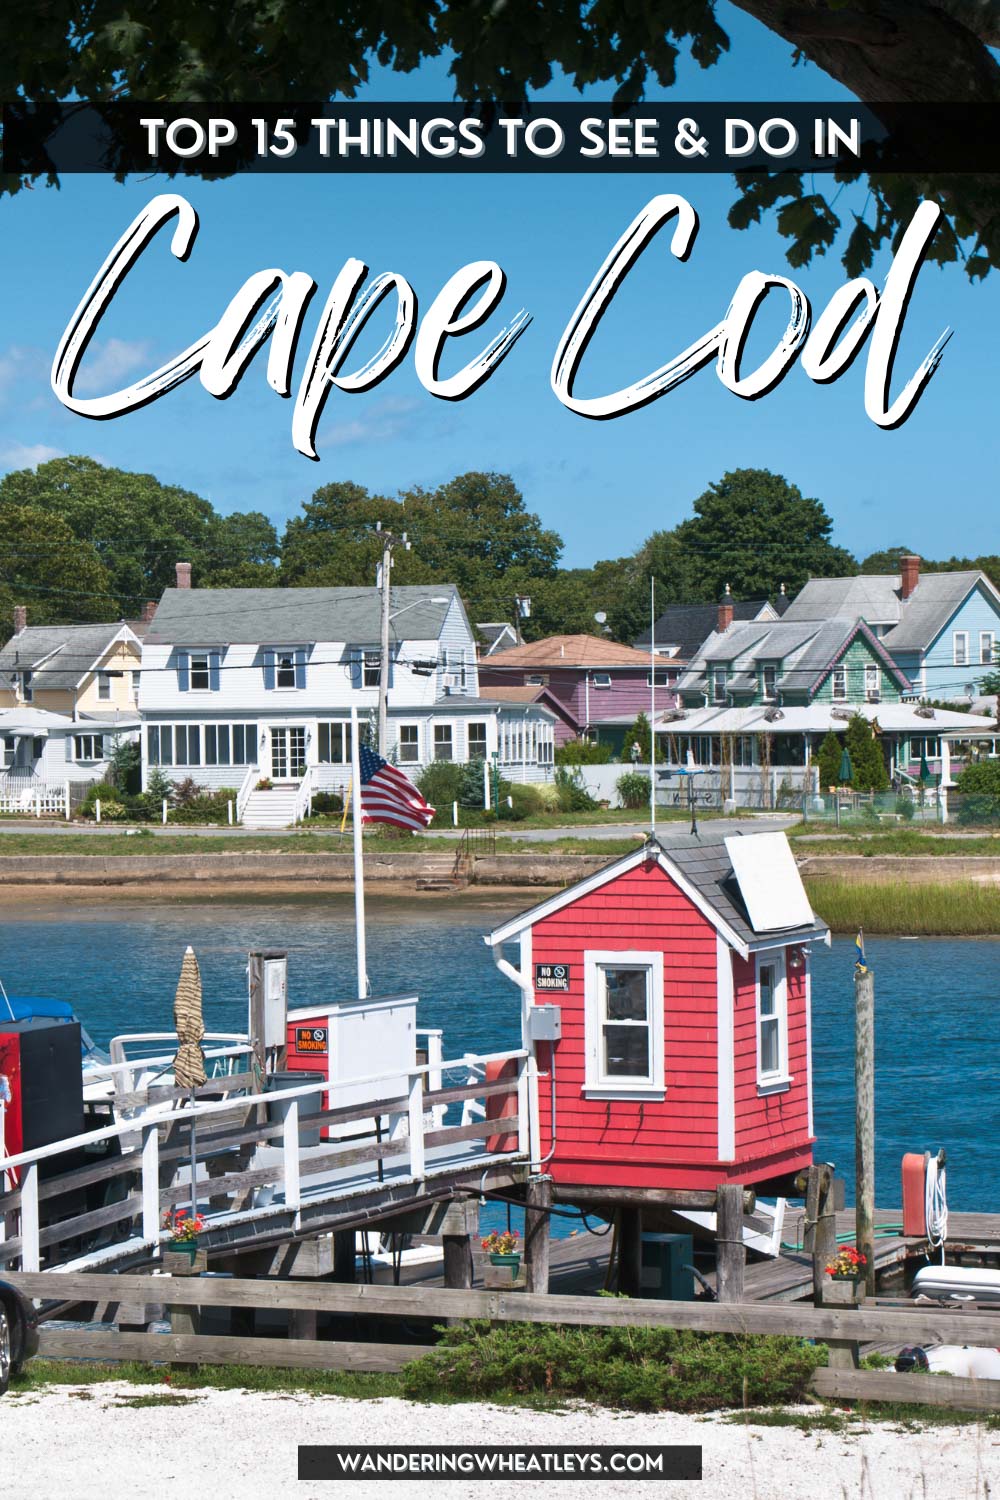 The Best Things to do in Cape Cod